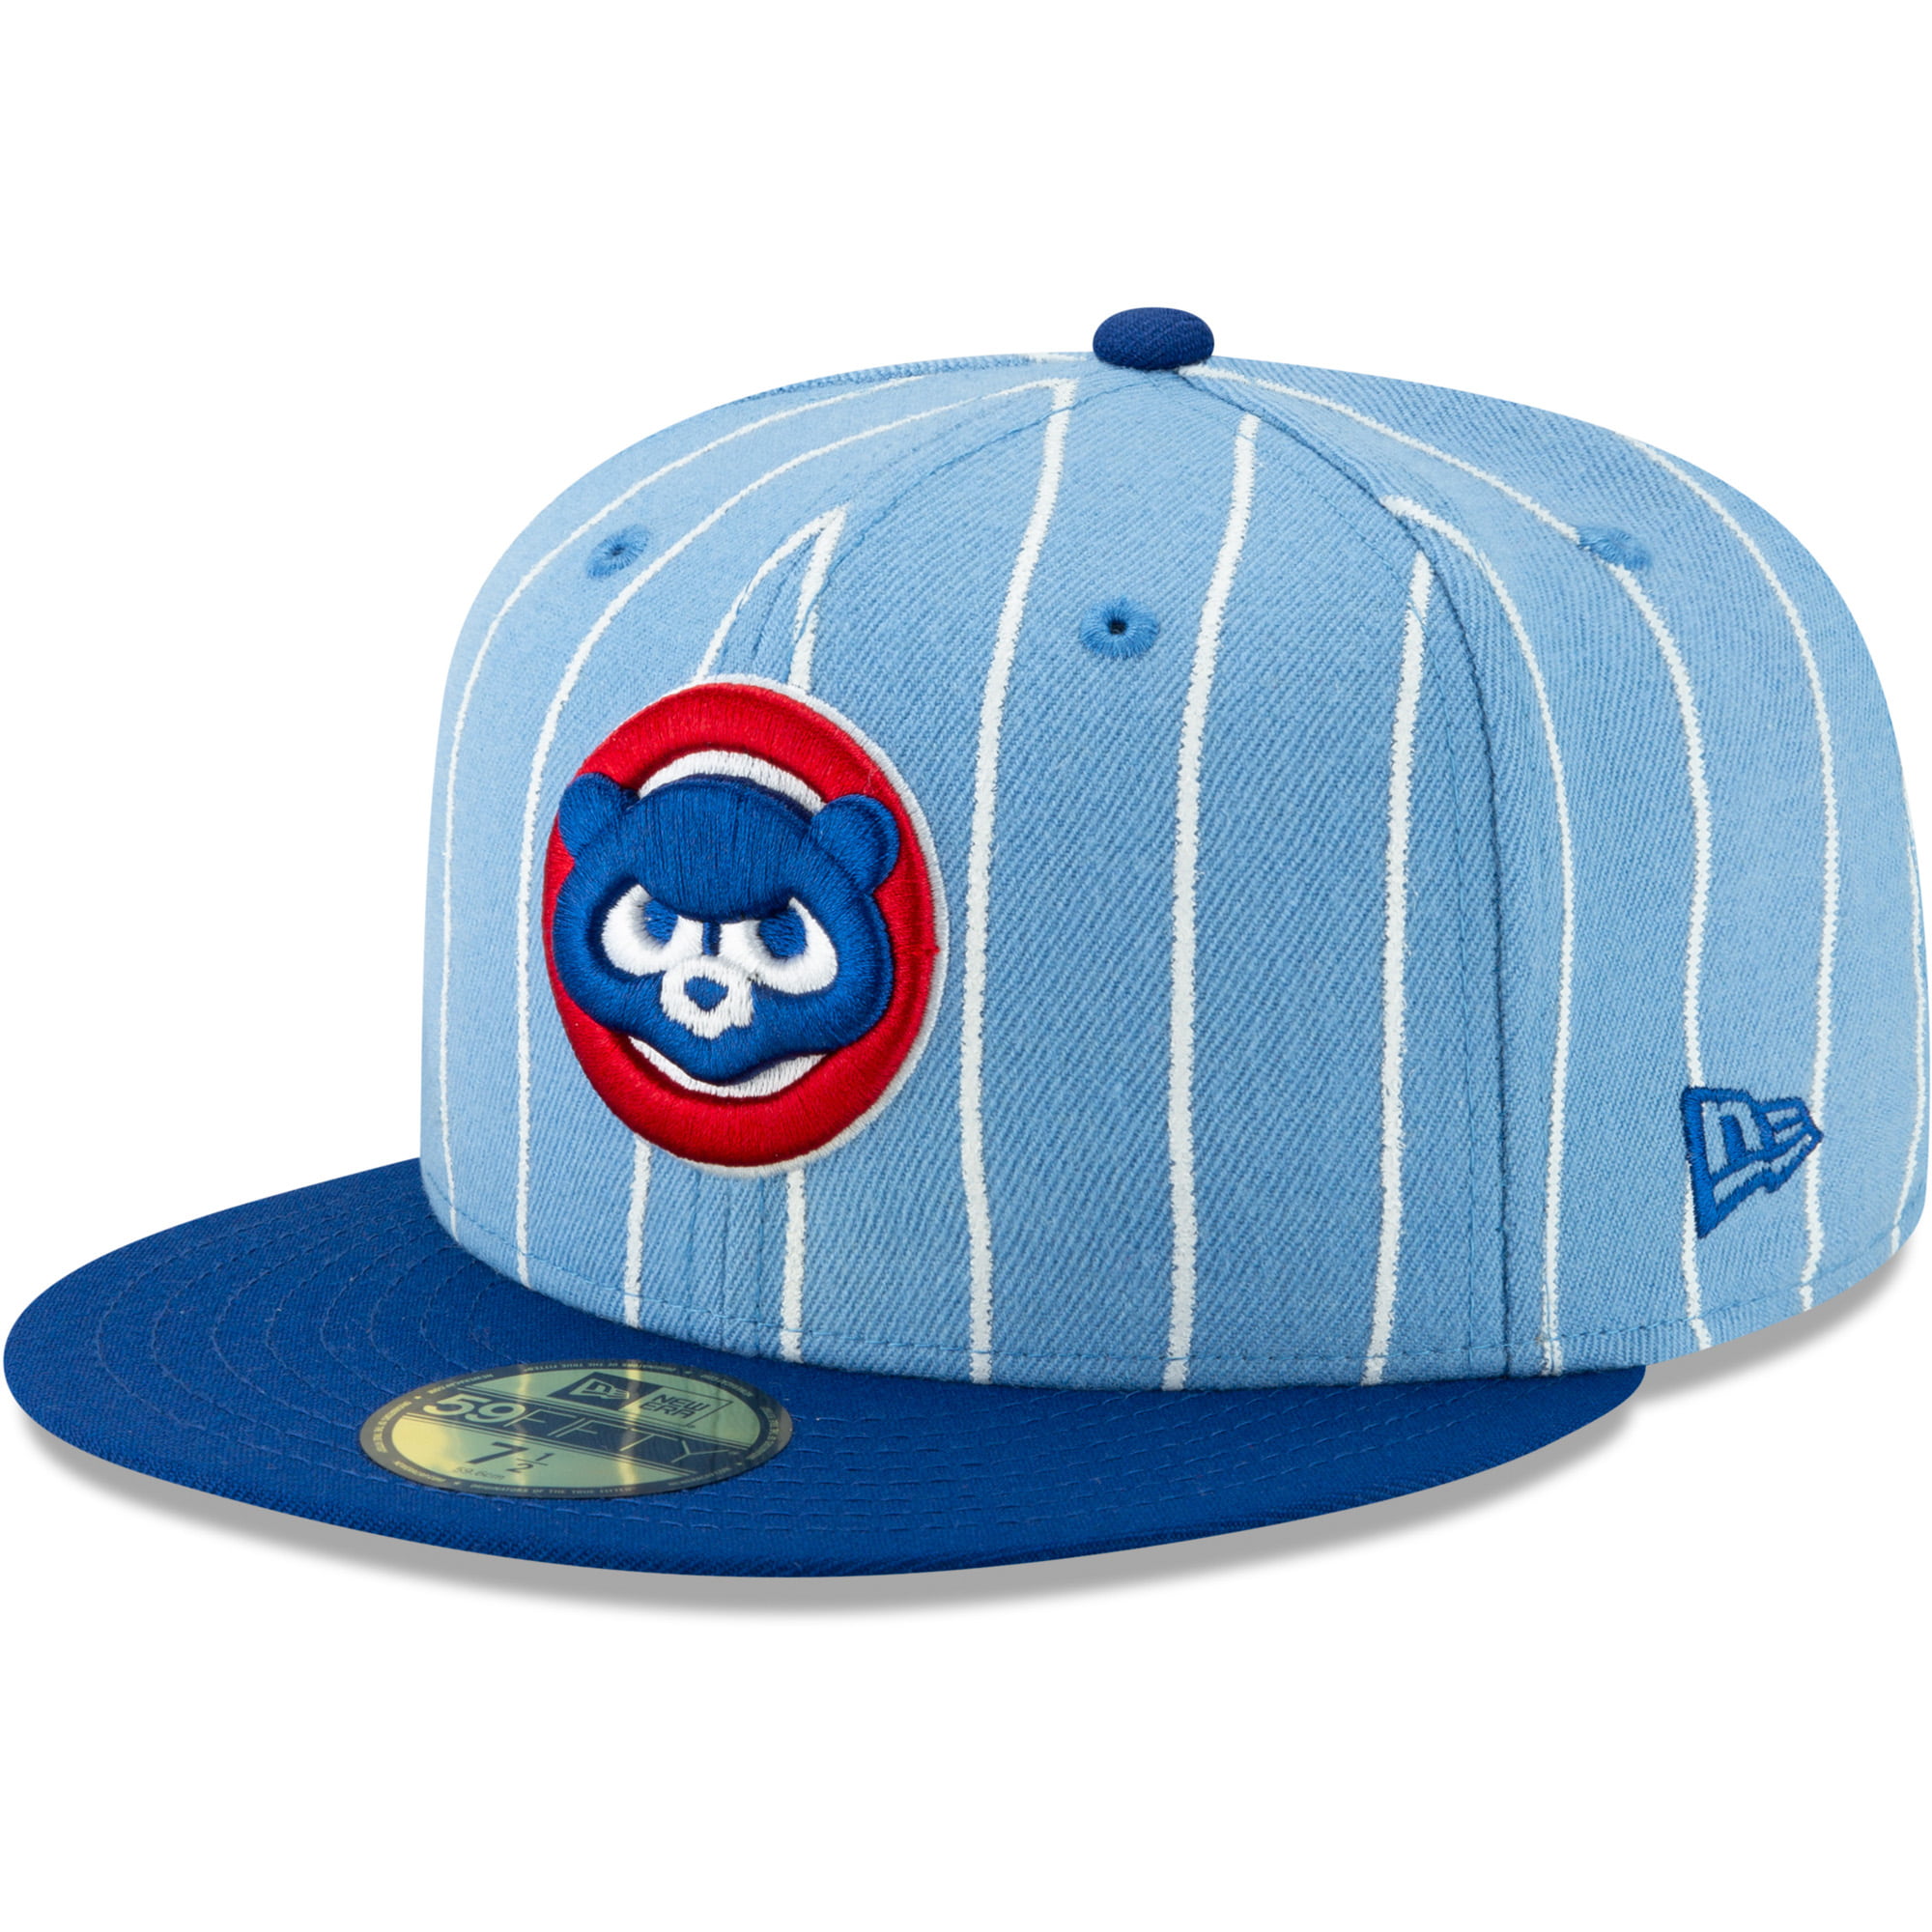 light blue fitted hat mlb